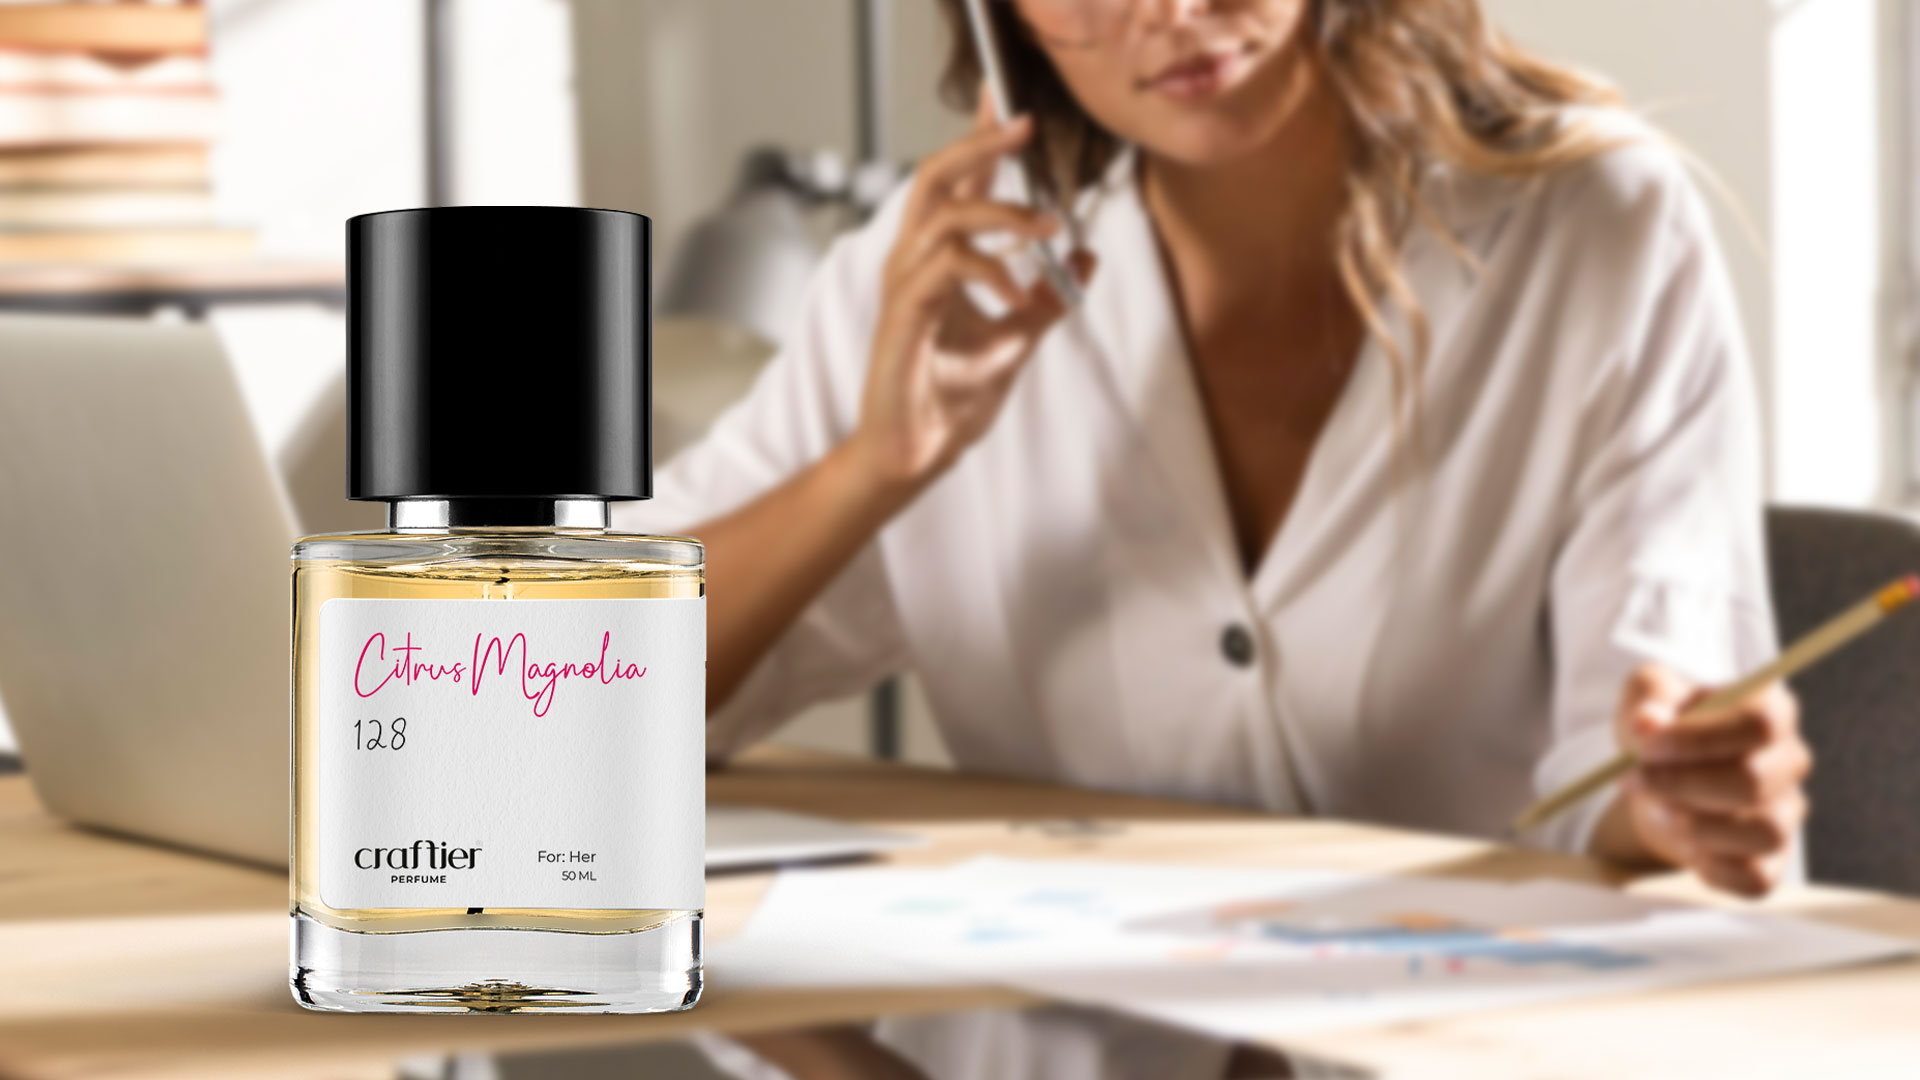 Get a Unique Perfume That Lasts All Day Long